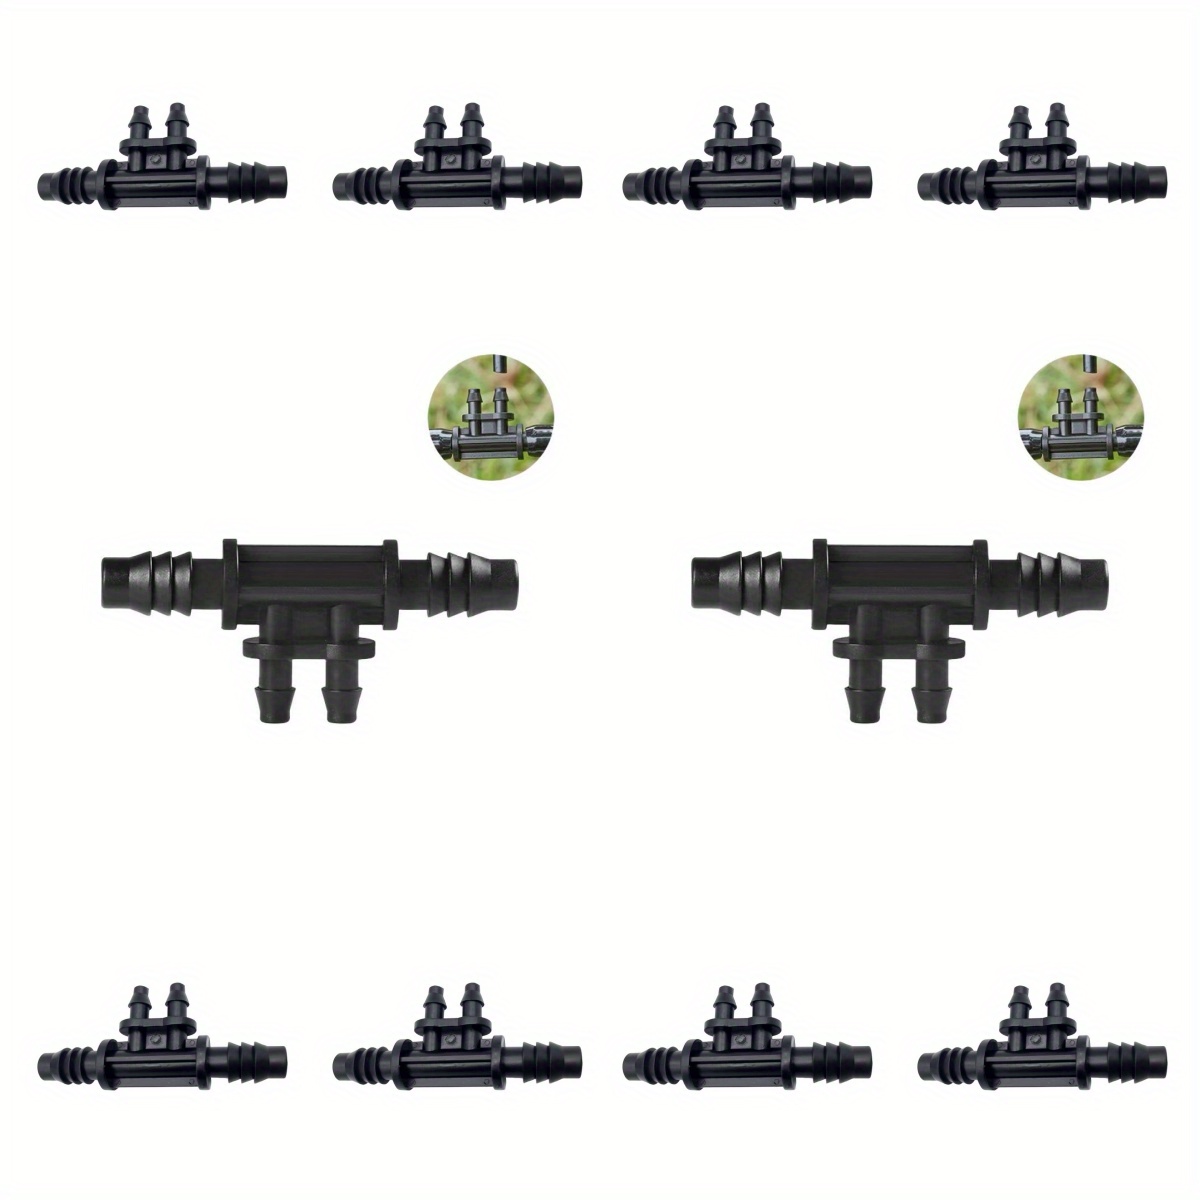 

10pcs 5/16 Inch To 1/4 Inch Greenhouse Drip Irrigation Fittings 4 Way Splitter, For 4mm Drip Hose Gardening Water Irrigation Fittings, Black Barbed Tees